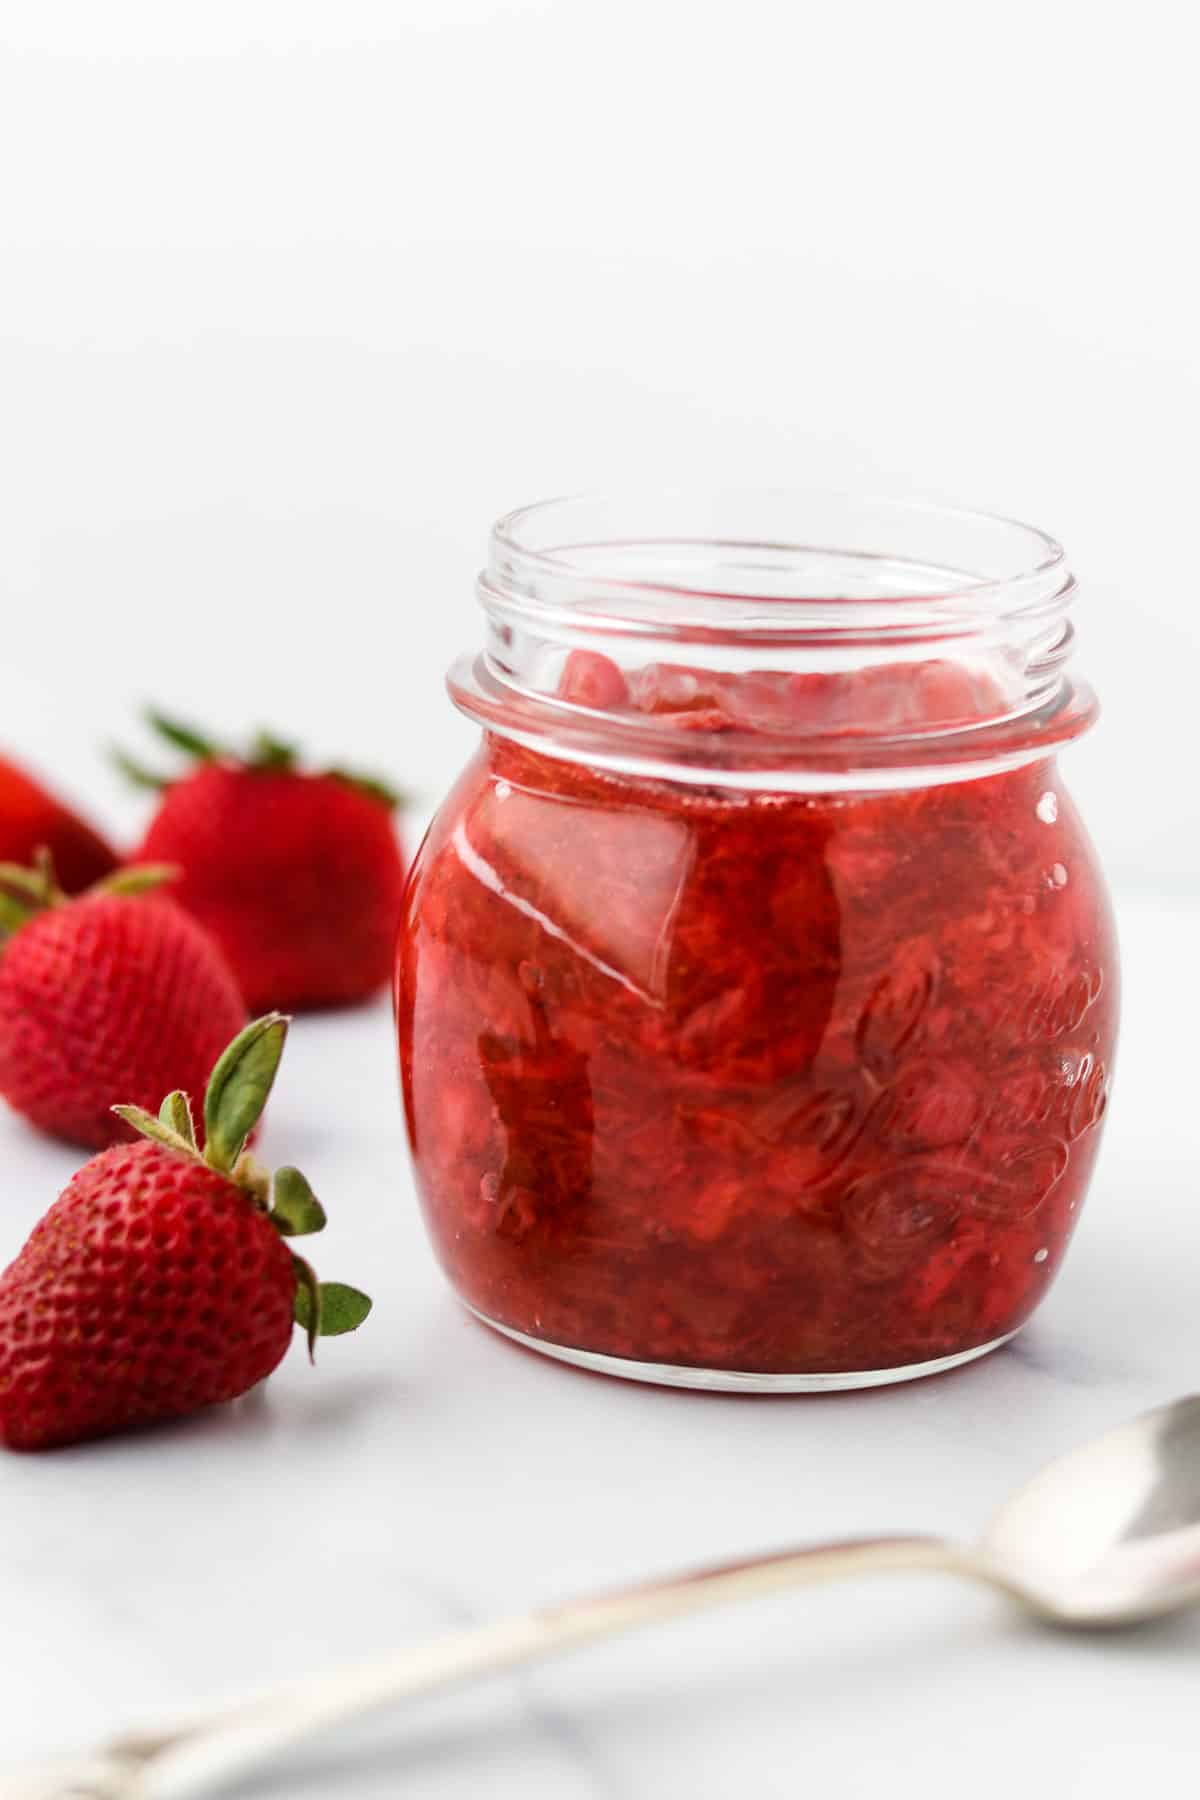 Jar of Roasted Strawberry Rhubarb Compote next to strawberries and a spoon.